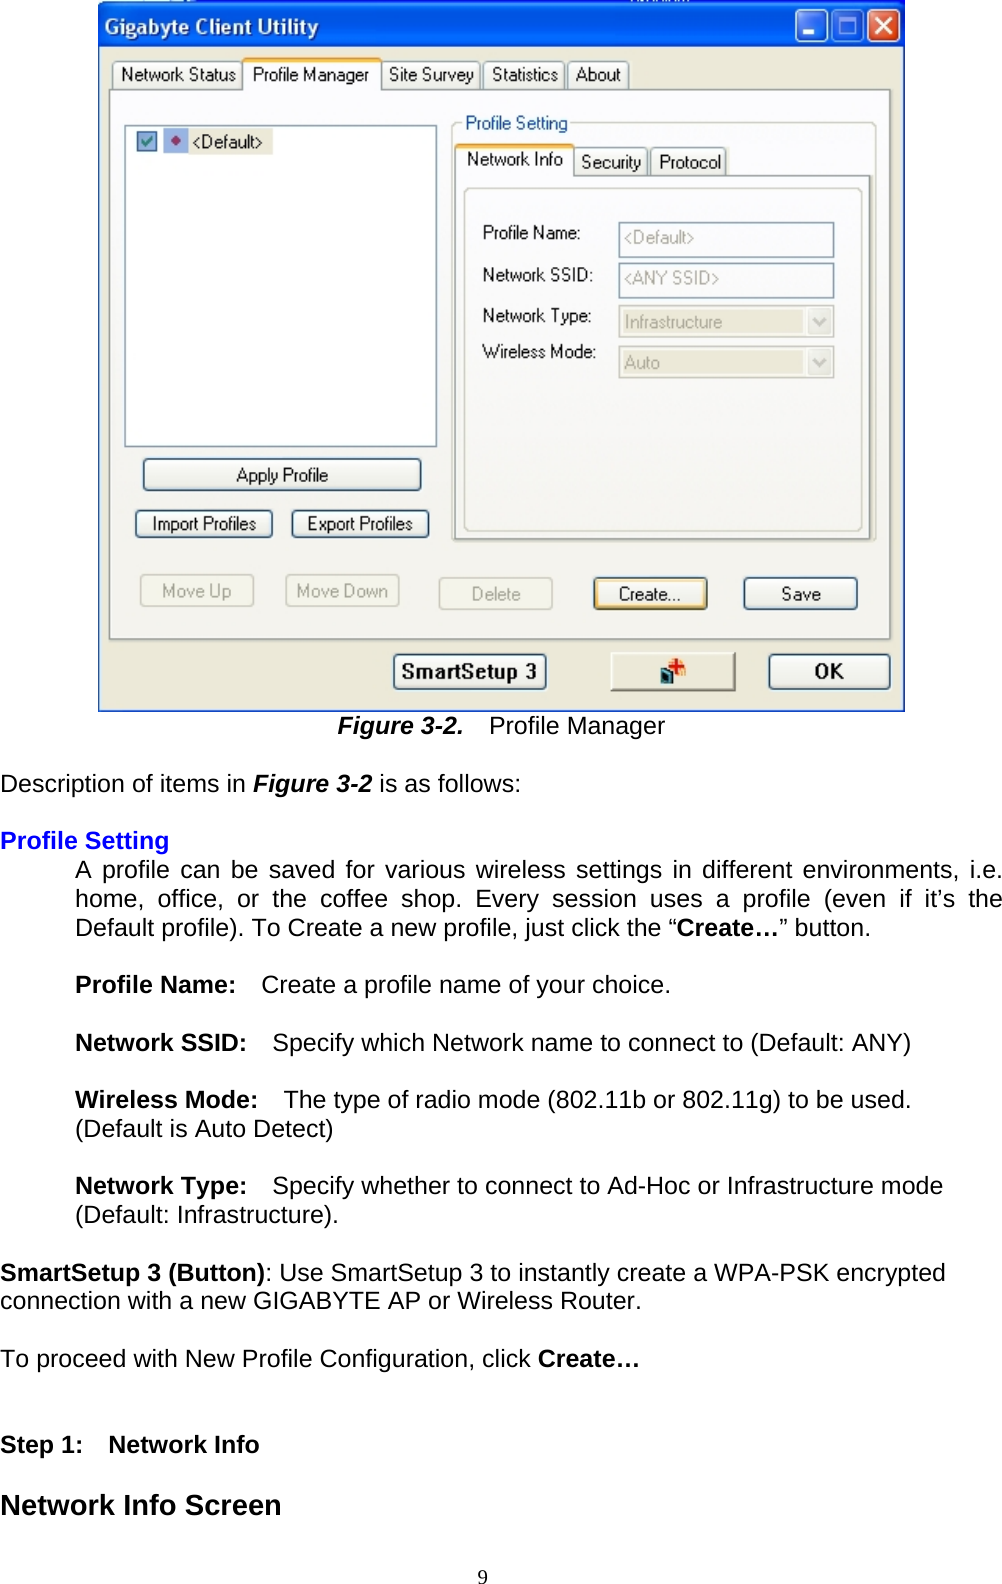  Figure 3-2.    Profile Manager  Description of items in Figure 3-2 is as follows:  Profile Setting   A profile can be saved for various wireless settings in different environments, i.e. home, office, or the coffee shop. Every session uses a profile (even if it’s the Default profile). To Create a new profile, just click the “Create…” button.  Profile Name:    Create a profile name of your choice.    Network SSID:  Specify which Network name to connect to (Default: ANY)  Wireless Mode:    The type of radio mode (802.11b or 802.11g) to be used. (Default is Auto Detect)   Network Type:  Specify whether to connect to Ad-Hoc or Infrastructure mode (Default: Infrastructure).  SmartSetup 3 (Button): Use SmartSetup 3 to instantly create a WPA-PSK encrypted connection with a new GIGABYTE AP or Wireless Router.  To proceed with New Profile Configuration, click Create…     Step 1:  Network Info  Network Info Screen 9   